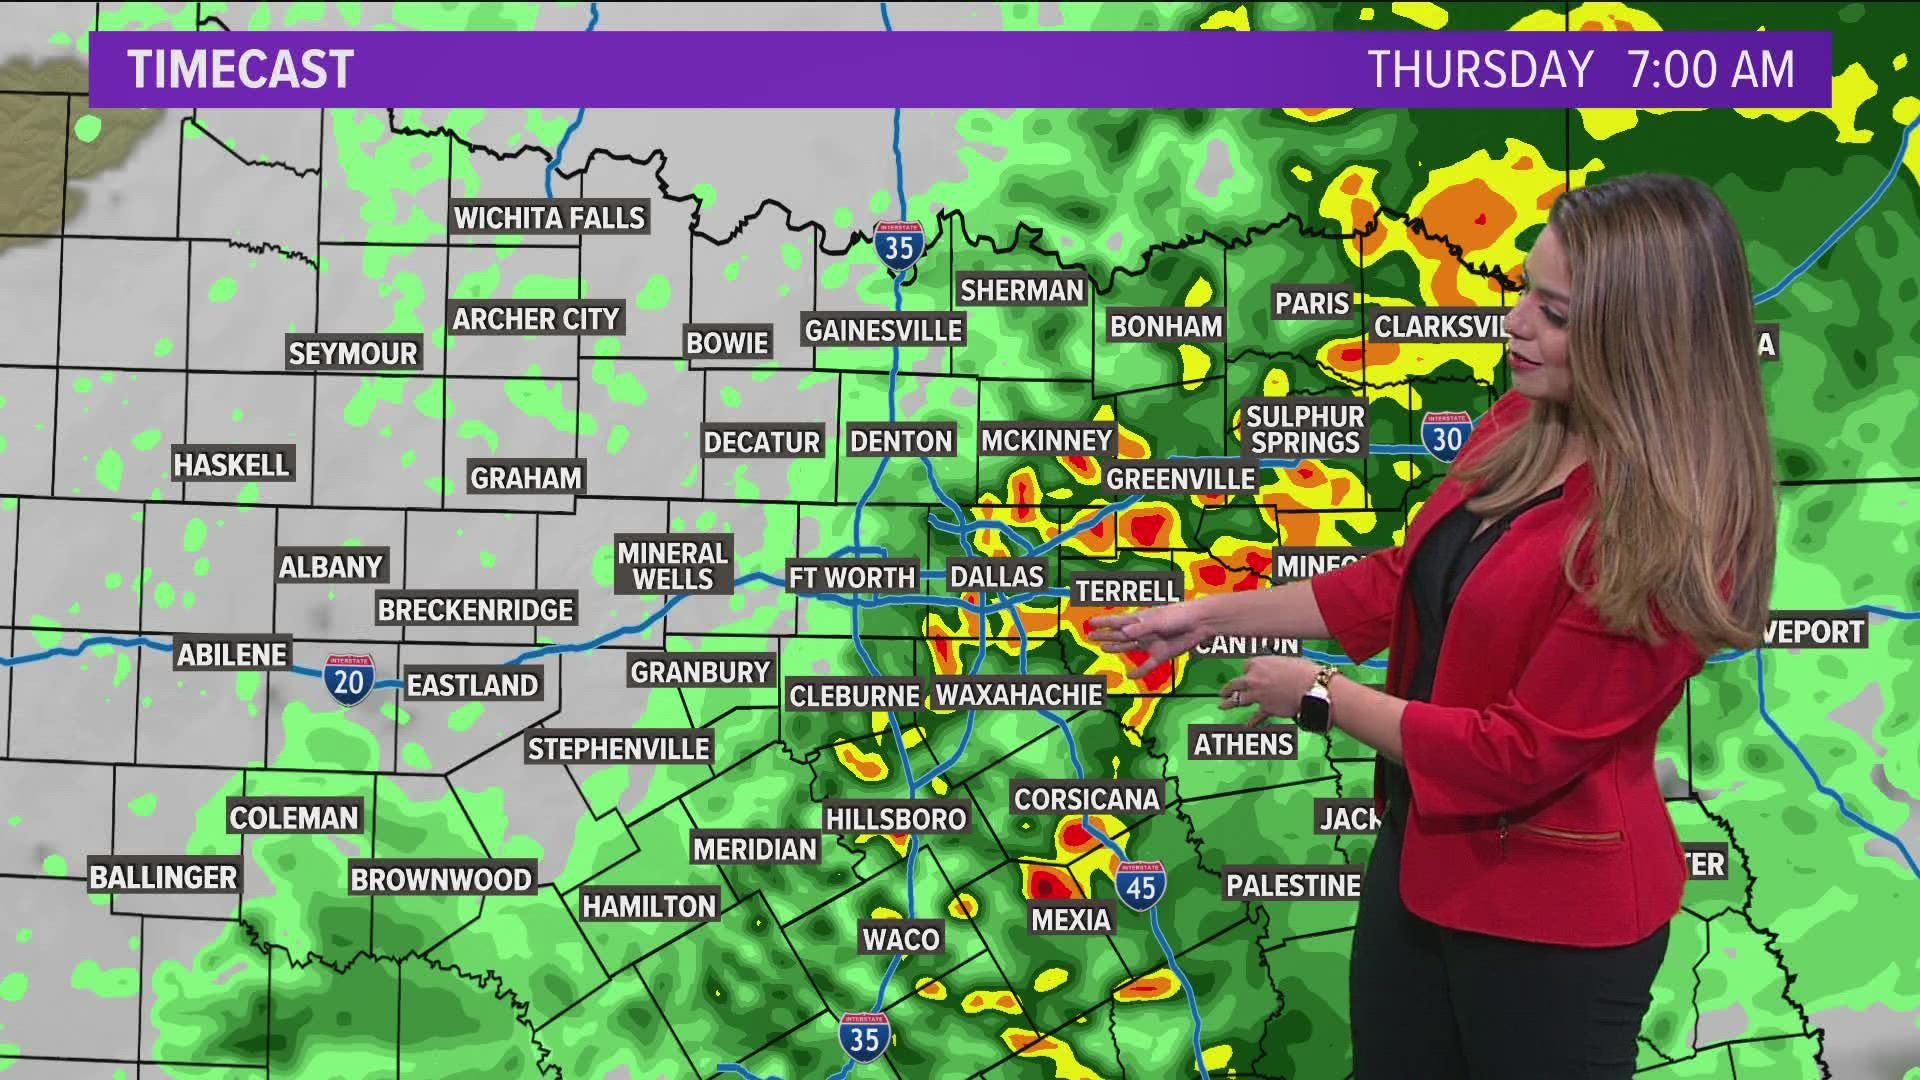 DFW Weather: Timing out Thanksgiving Day rain